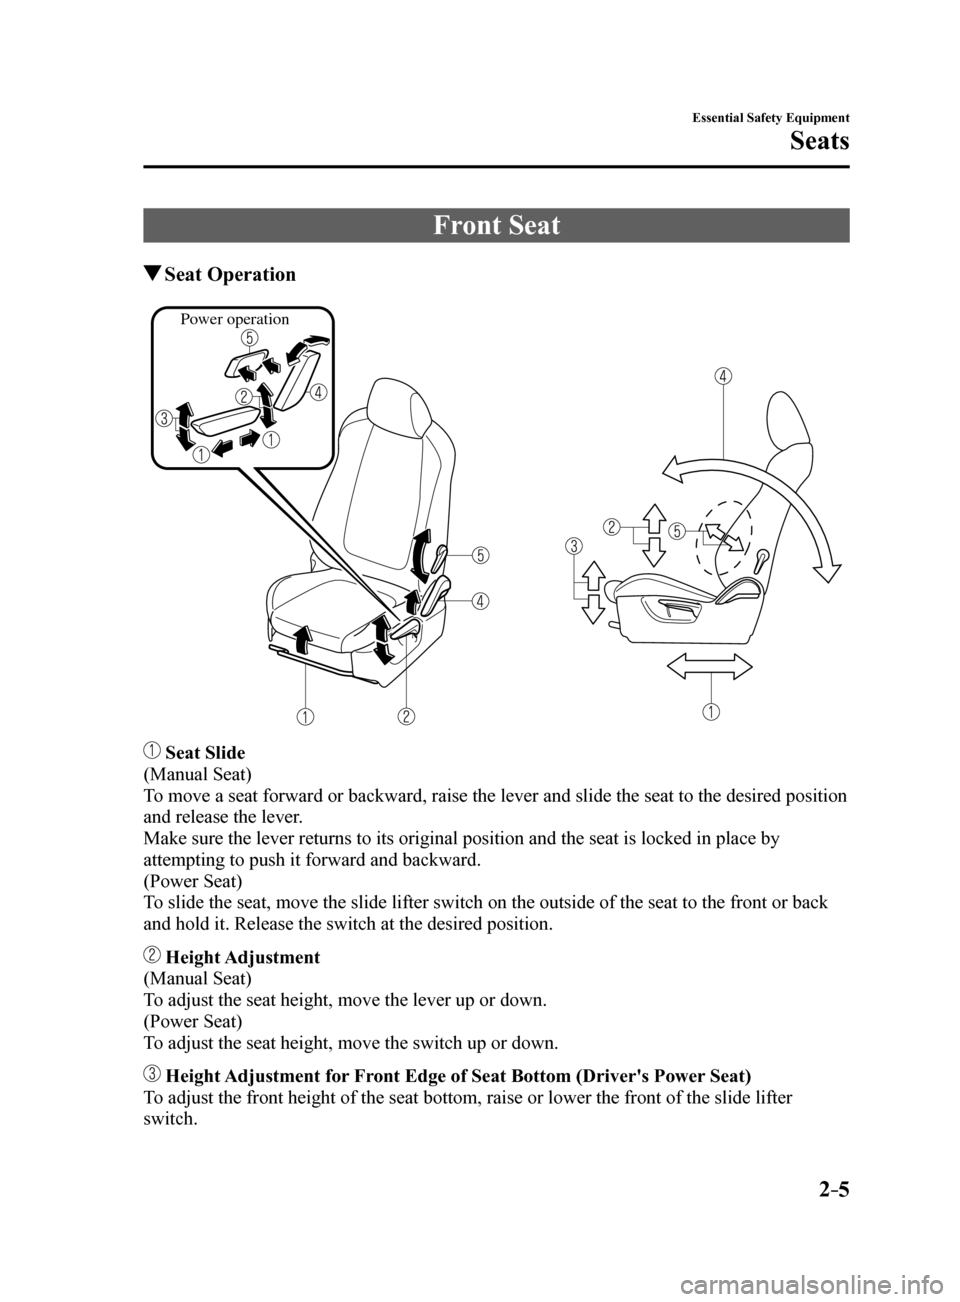 MAZDA MODEL 6 2017  Owners Manual (in English) 2–5
Essential Safety Equipment
Seats
Front Seat
 Seat  Operation
Power operation
 Seat Slide
(Manual Seat)
To move a seat forward or backward, raise the lever and slide the seat to\
 the desired pos